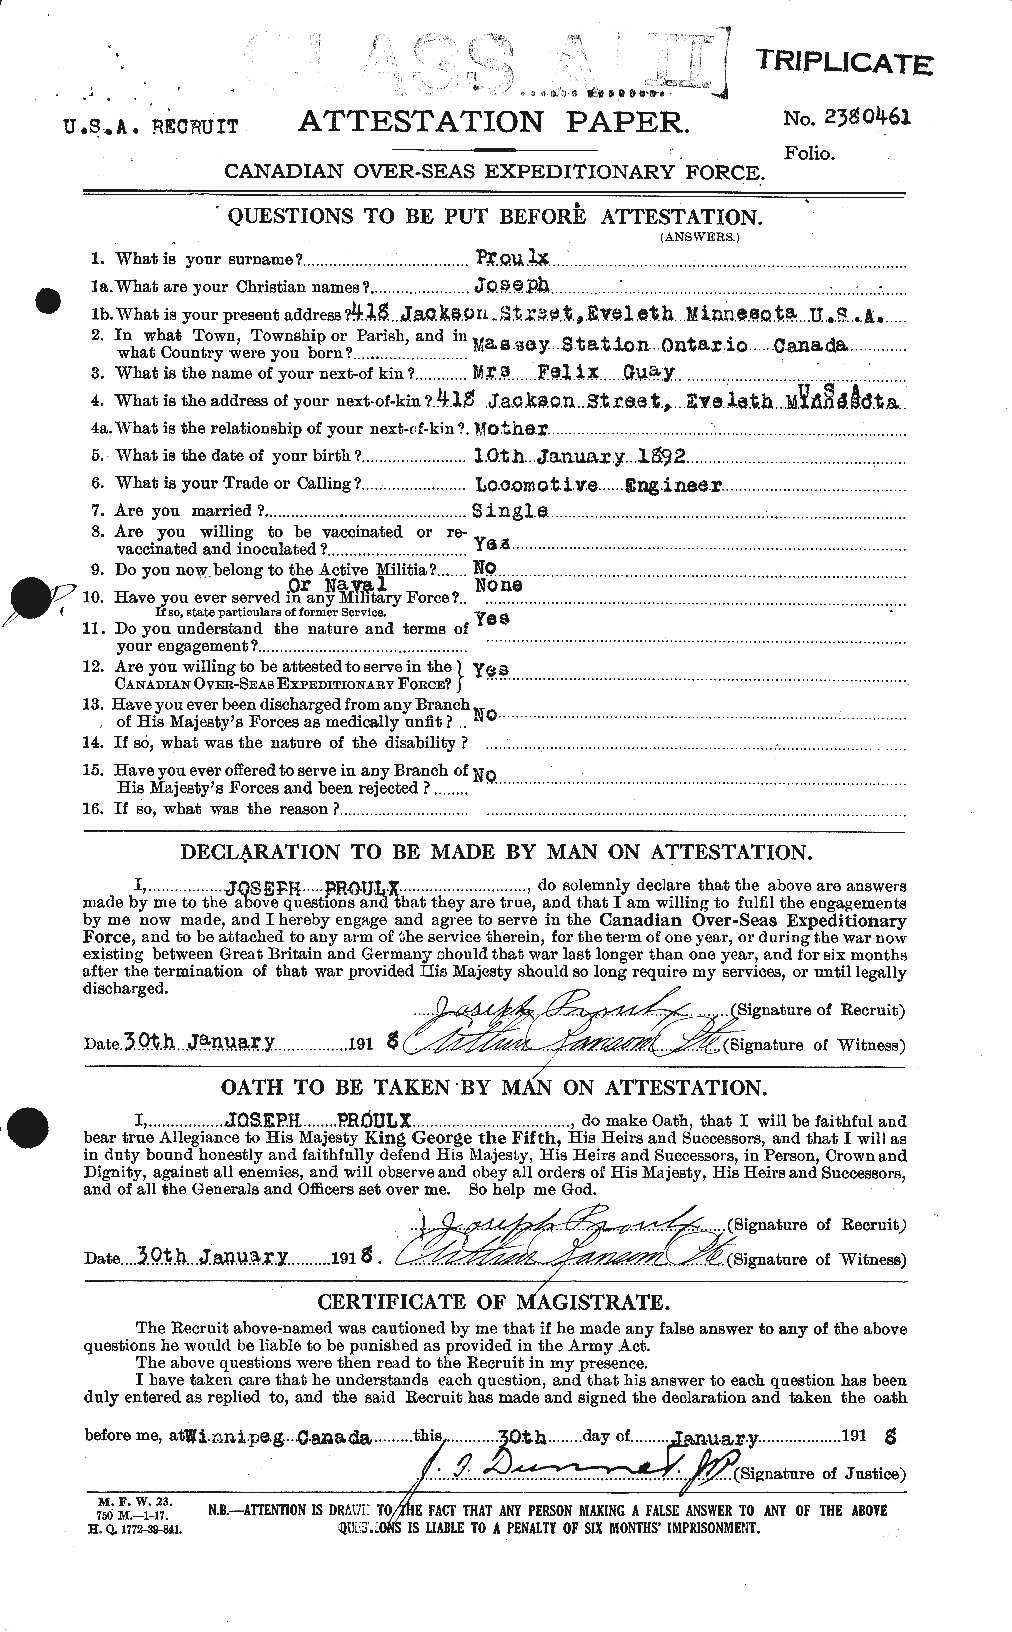 Personnel Records of the First World War - CEF 591598a